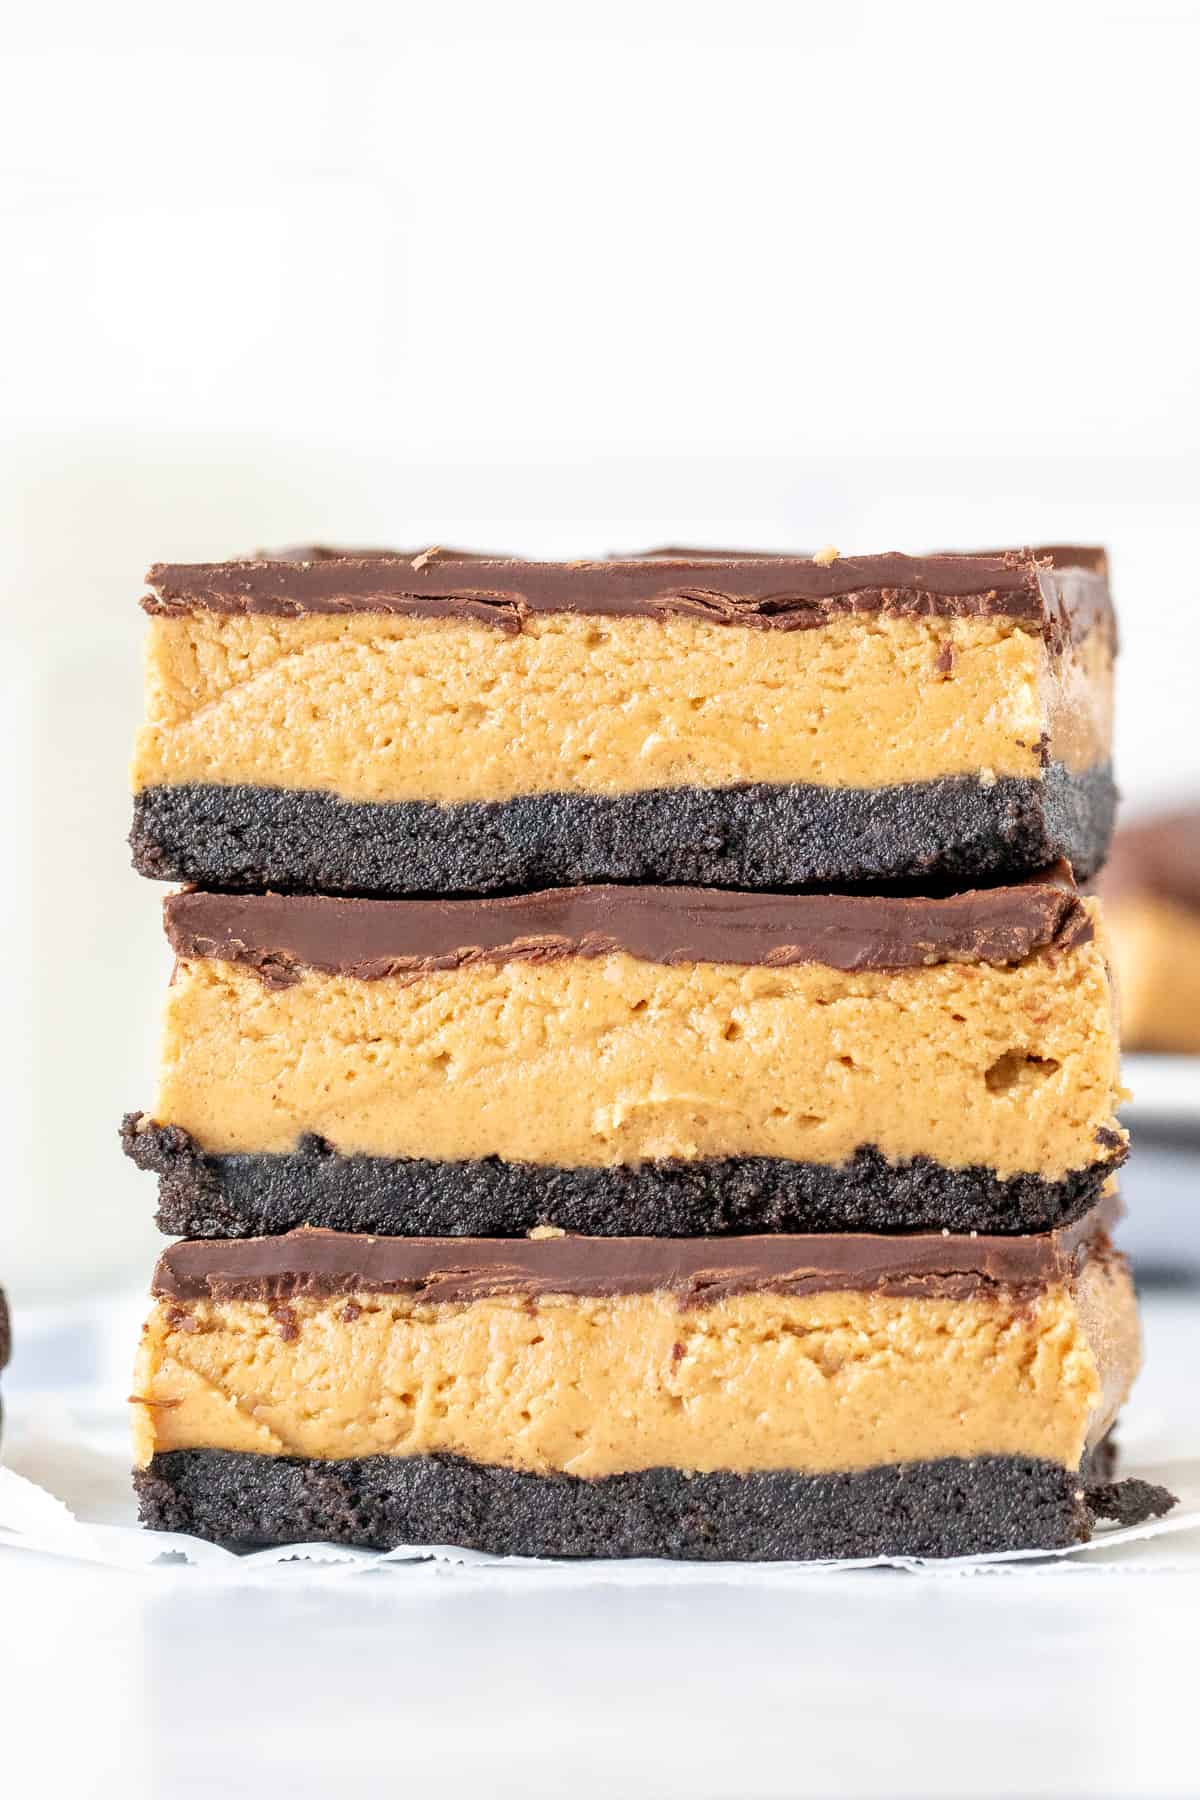 Stack of 3 peanut butter Oreo bars, one on top of each other.